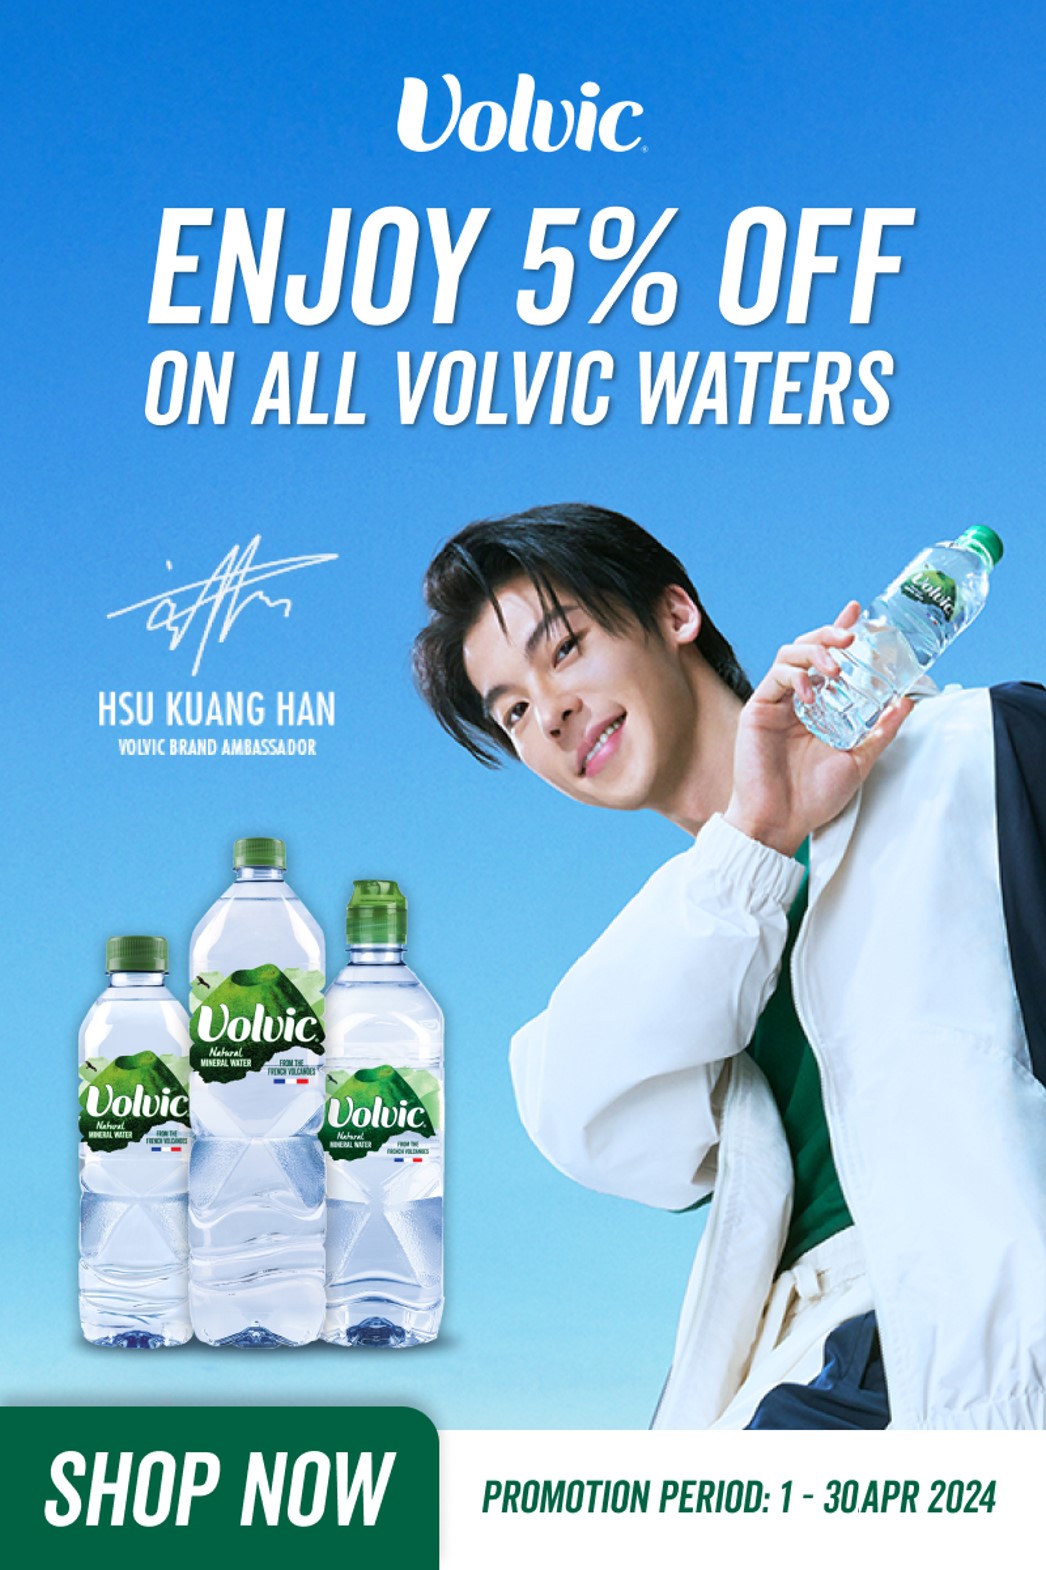 Enjoy 5 % off on all Volvic Natural Mineral Water